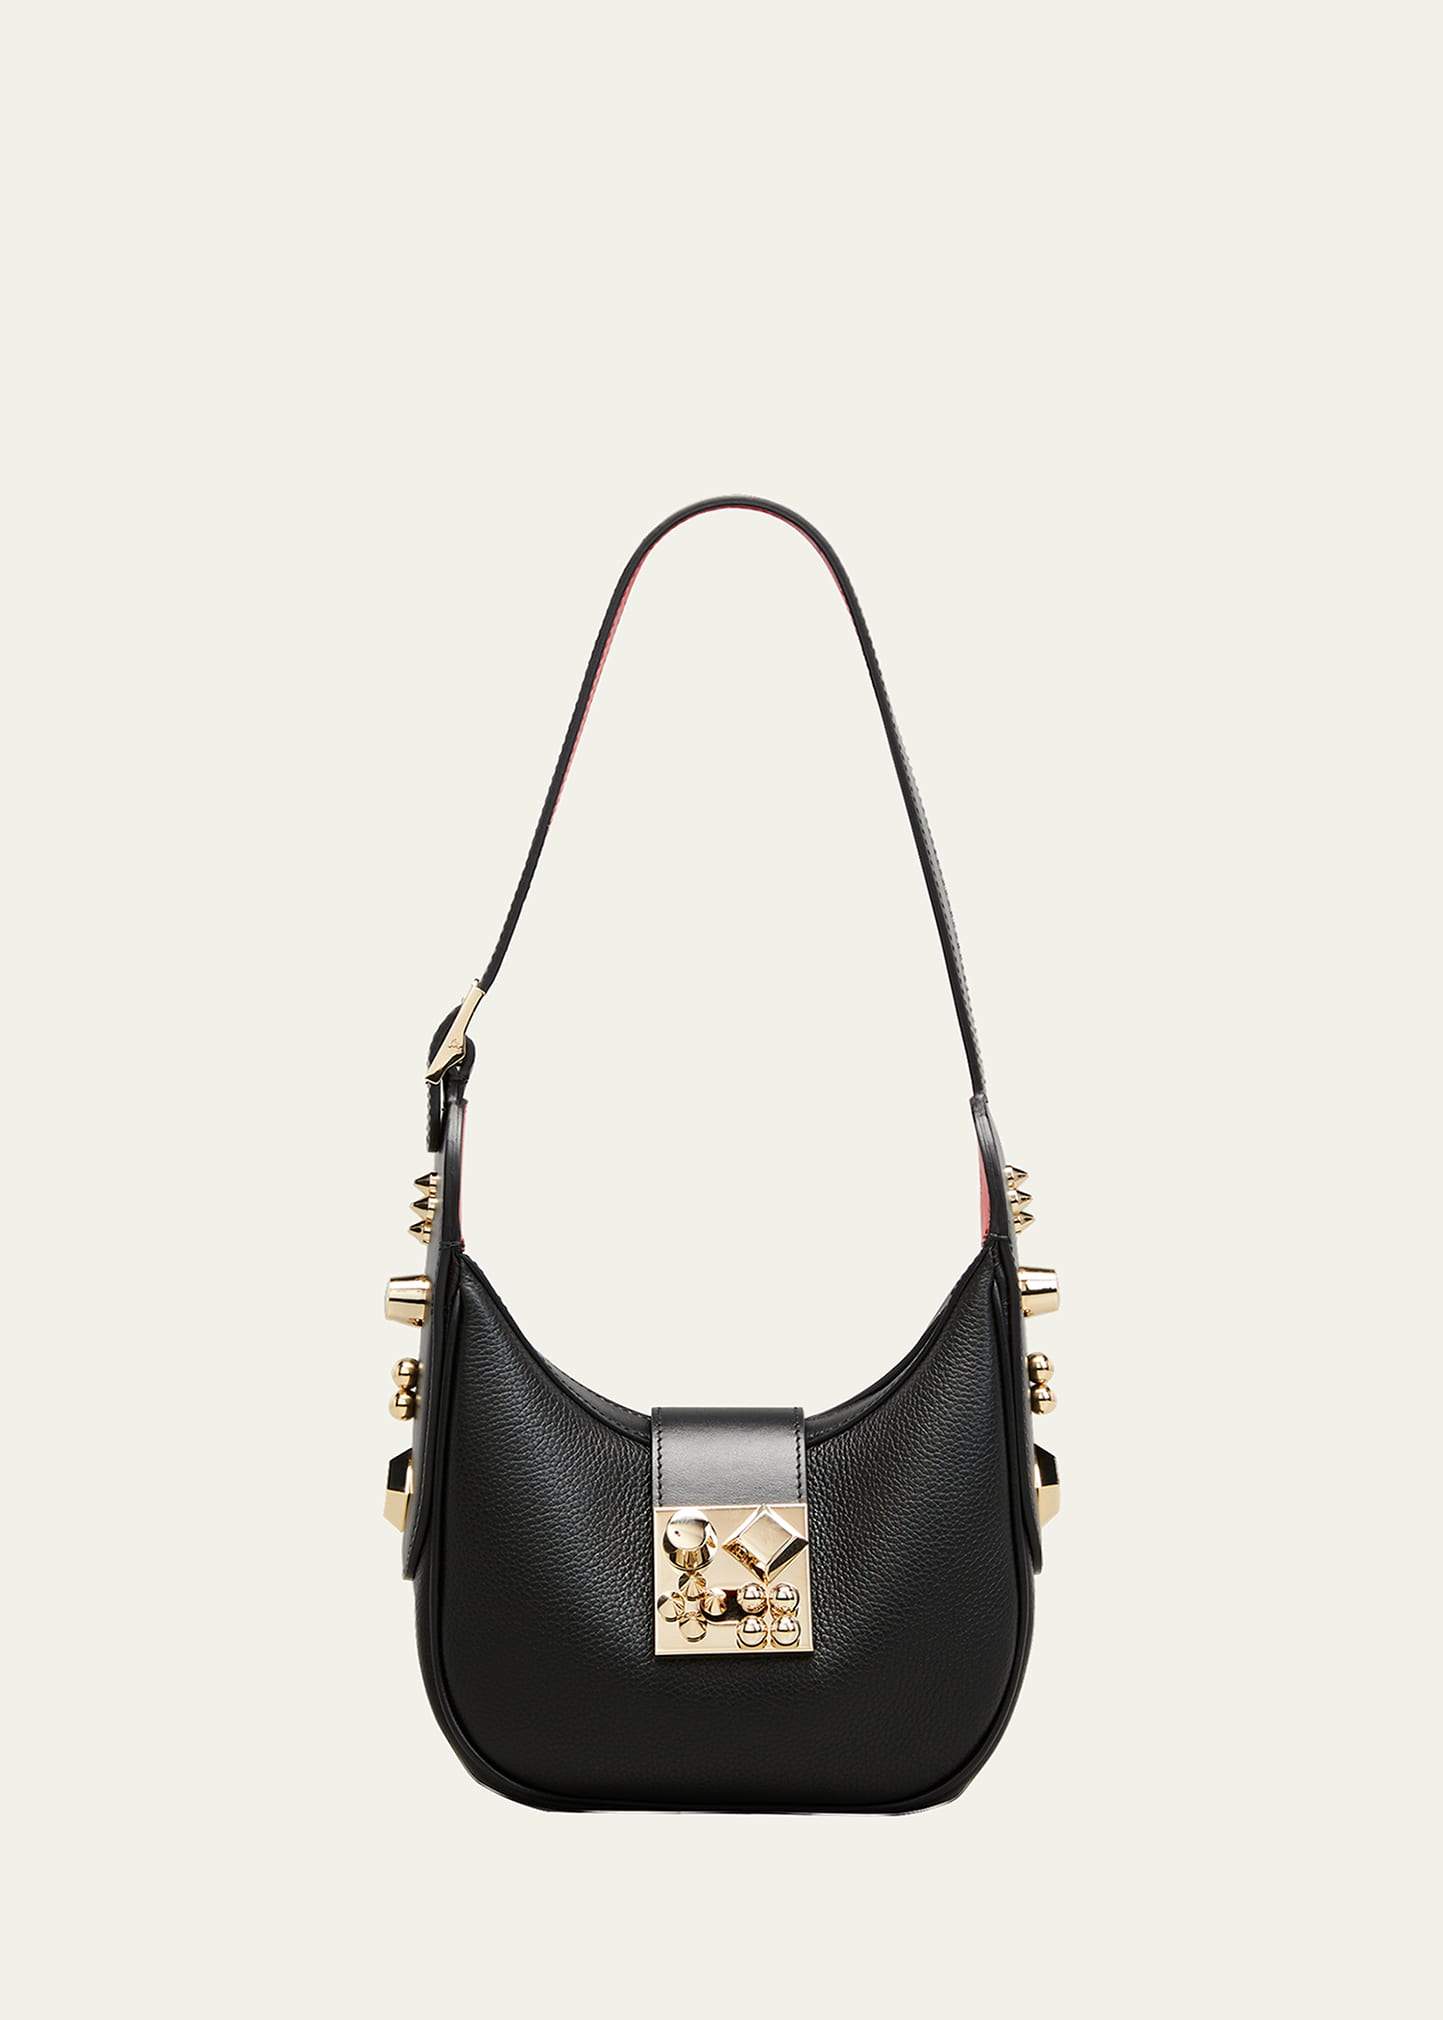 Carasky Mini Shoulder Bag in Grained Leather with Spikes